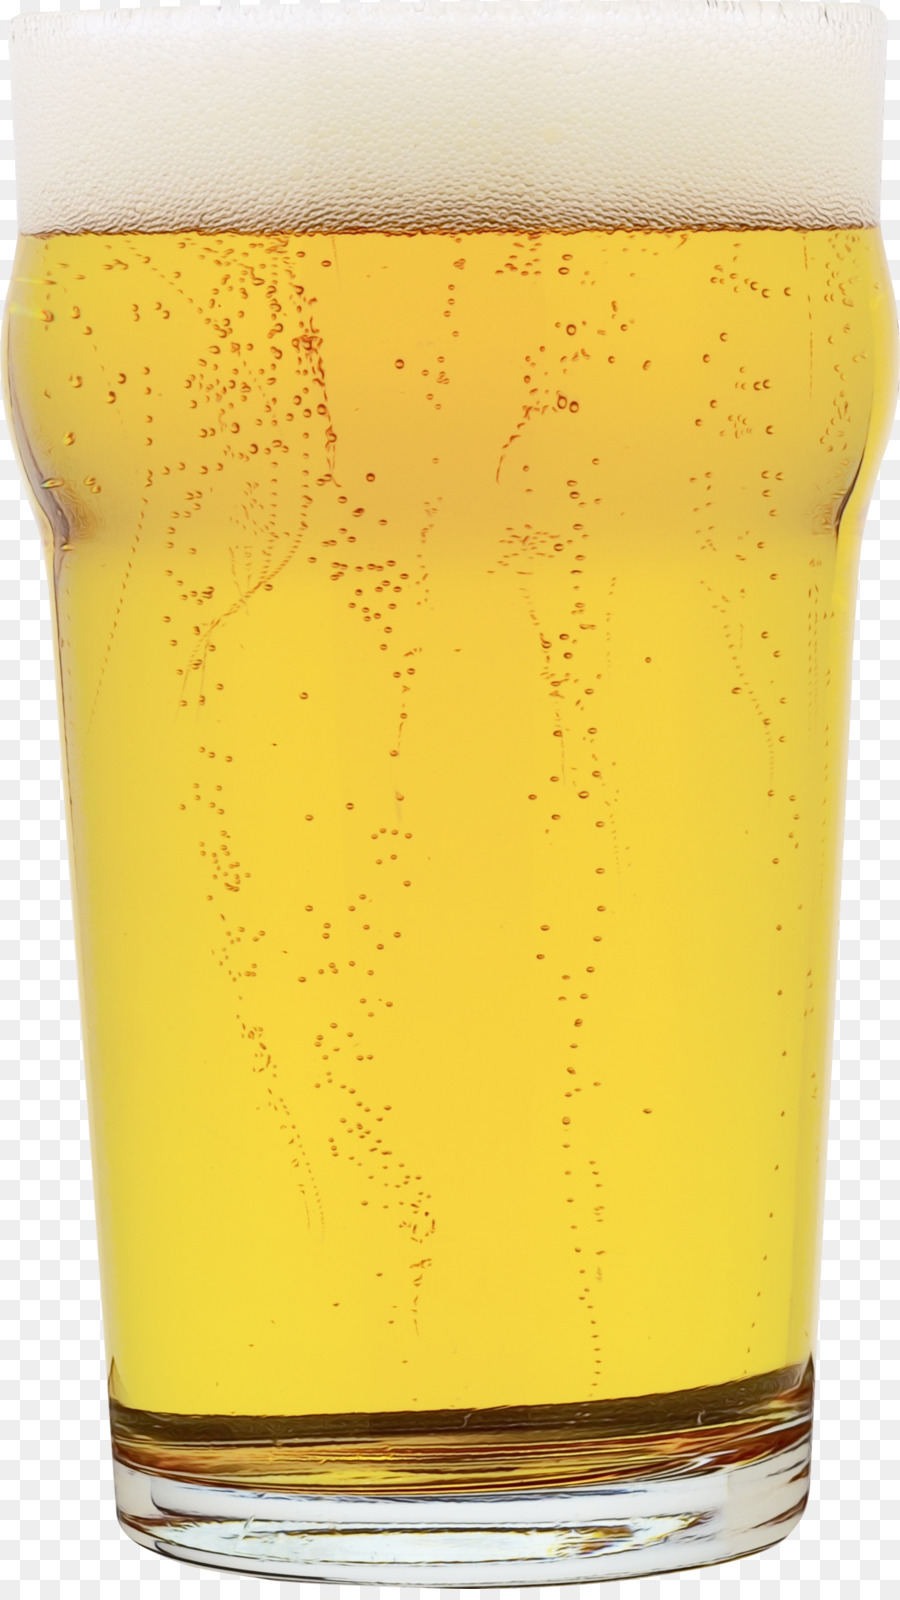 pint glass drink beer glass yellow pint